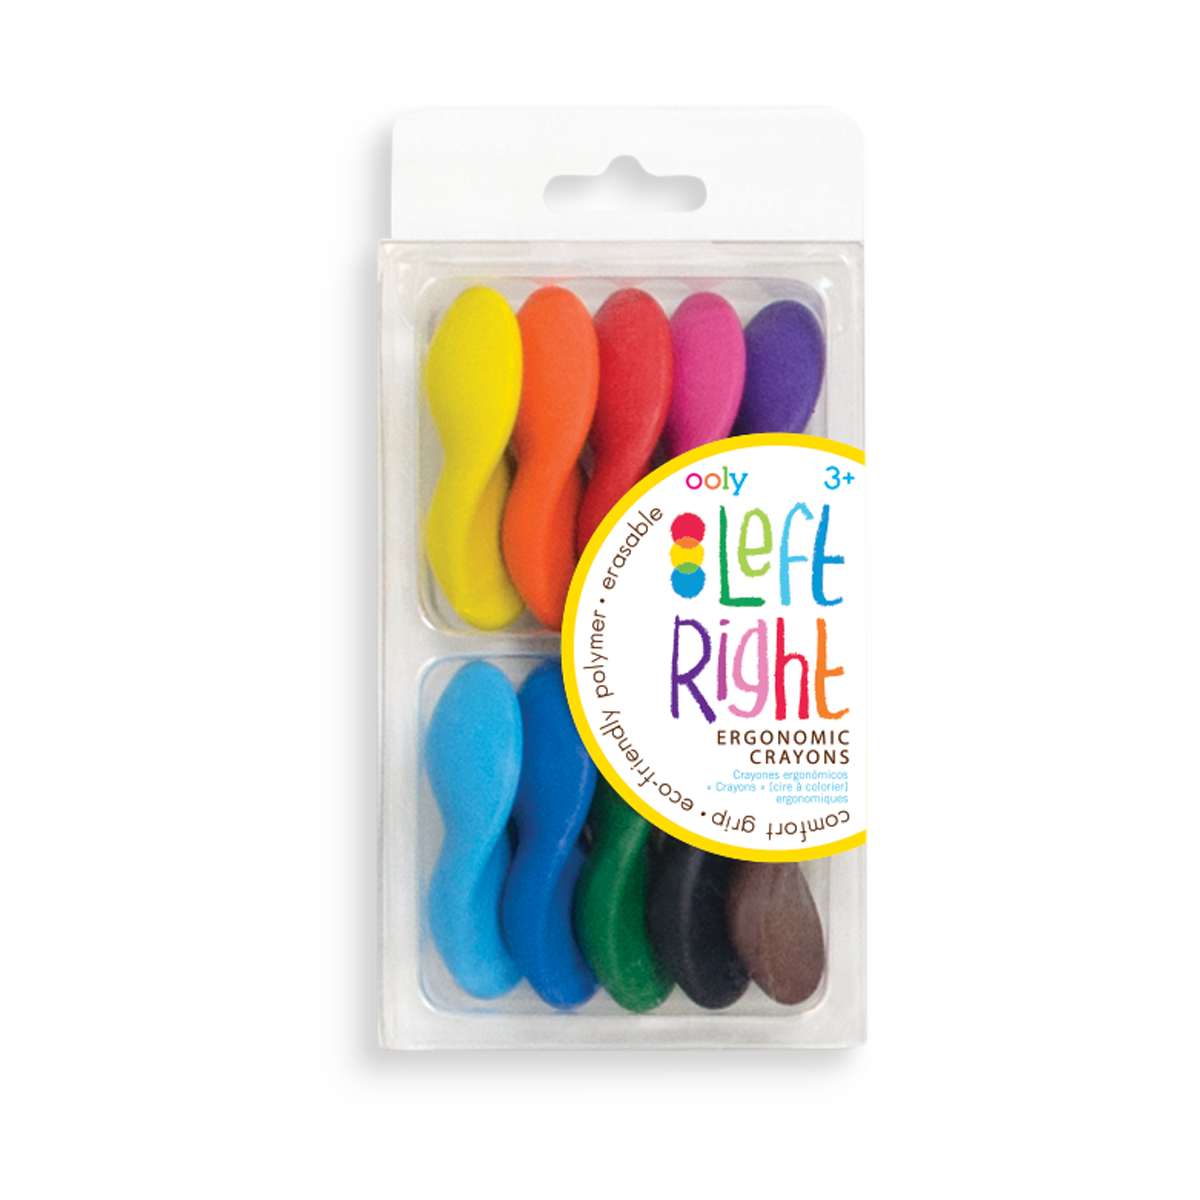 Set of Left Right ergonomic crayons for right and left handed people